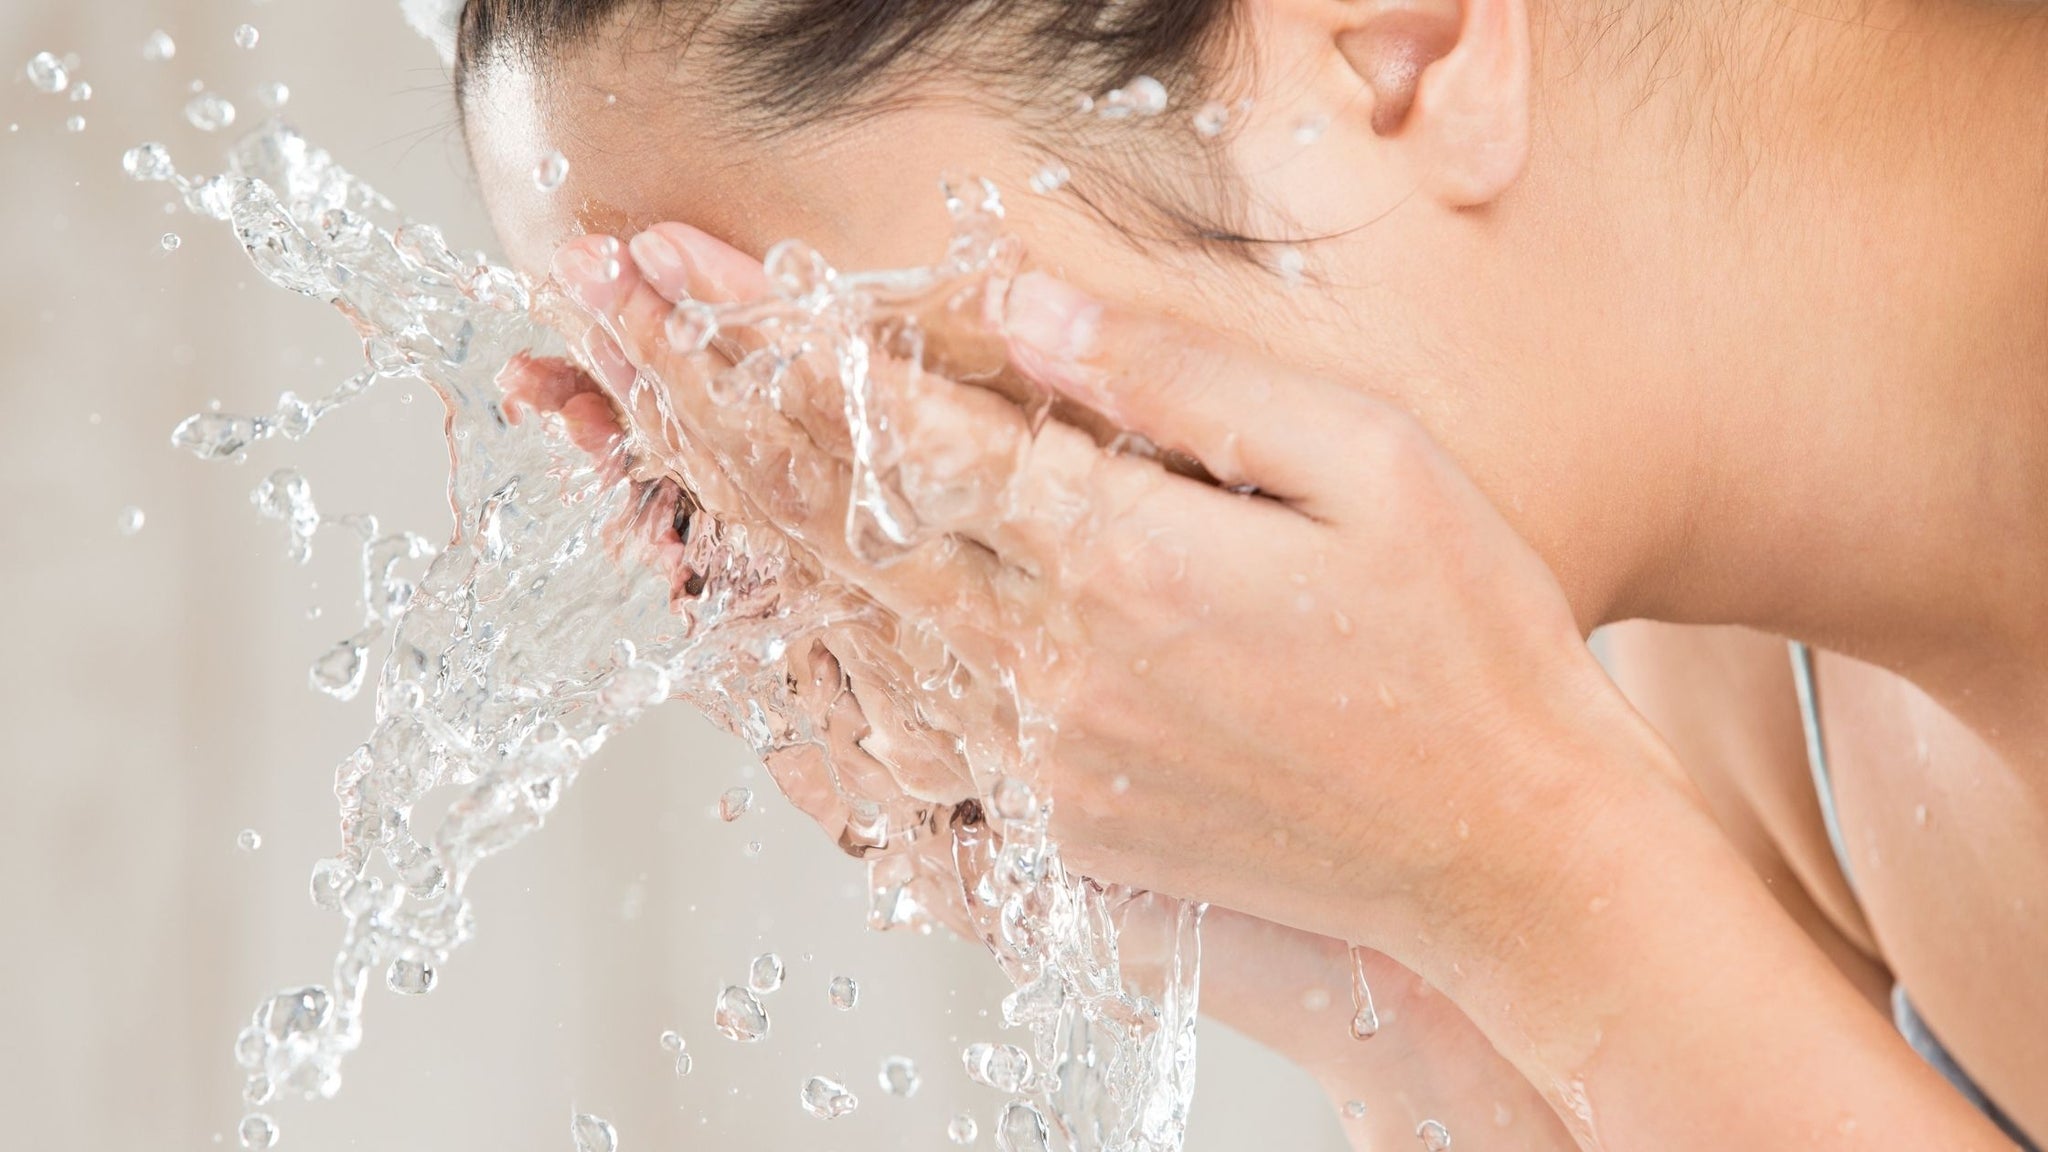 Do's and don'ts for washing your face. How often should you wash your face?